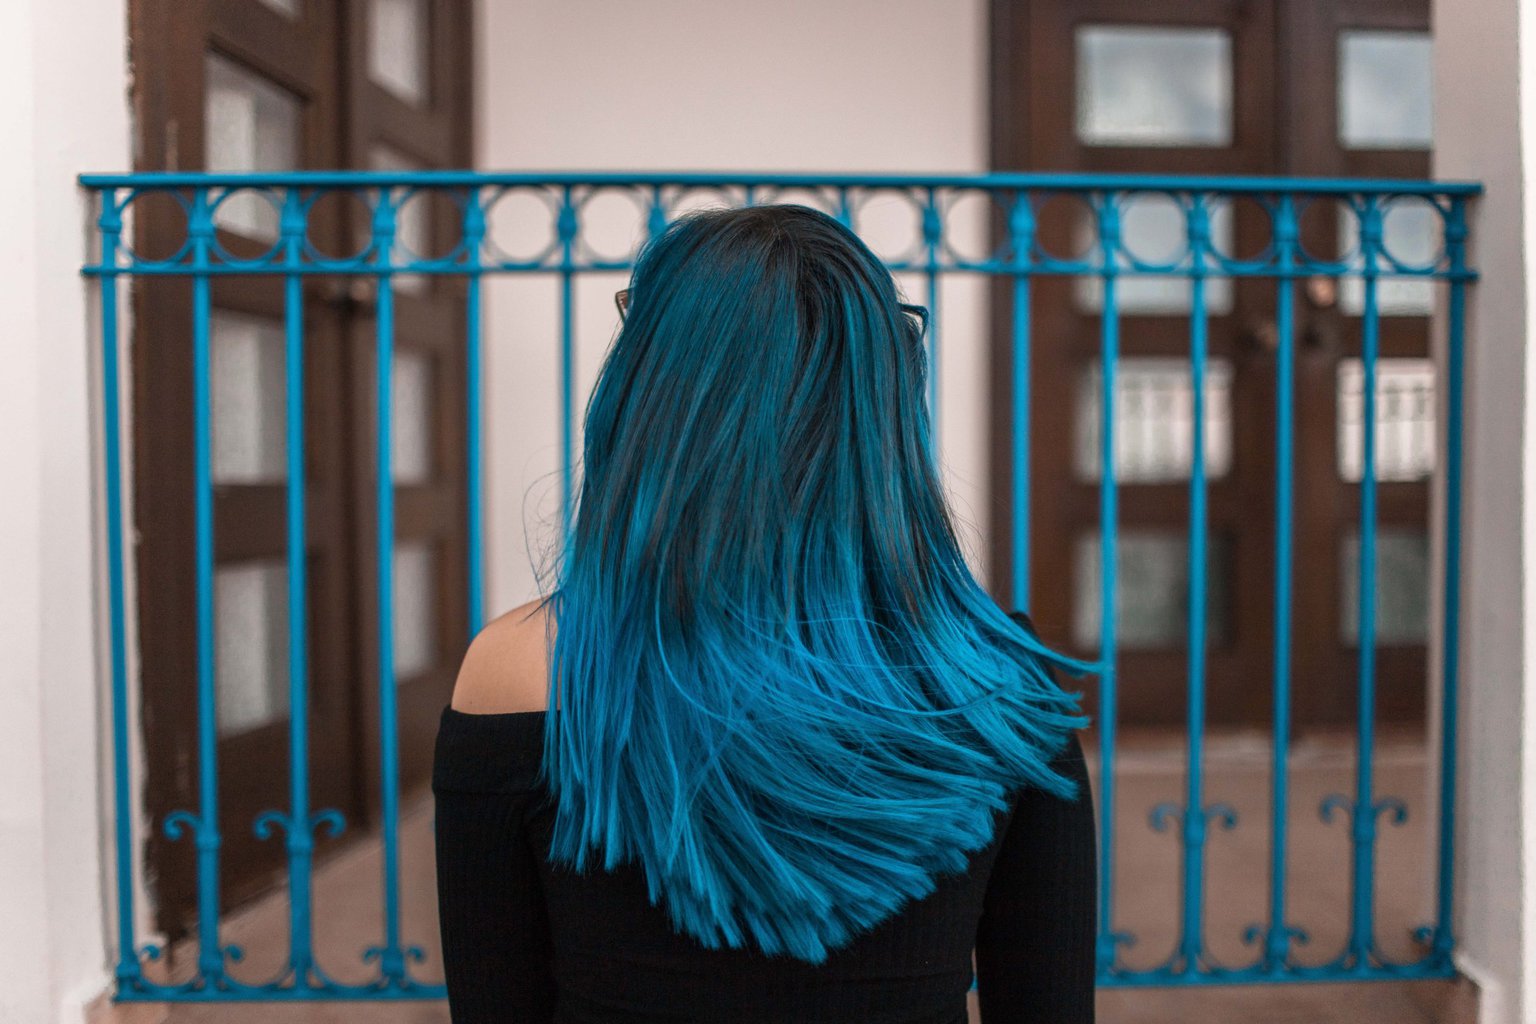 20 Stunning Blue Hair Ideas You Should Try - College Fashion